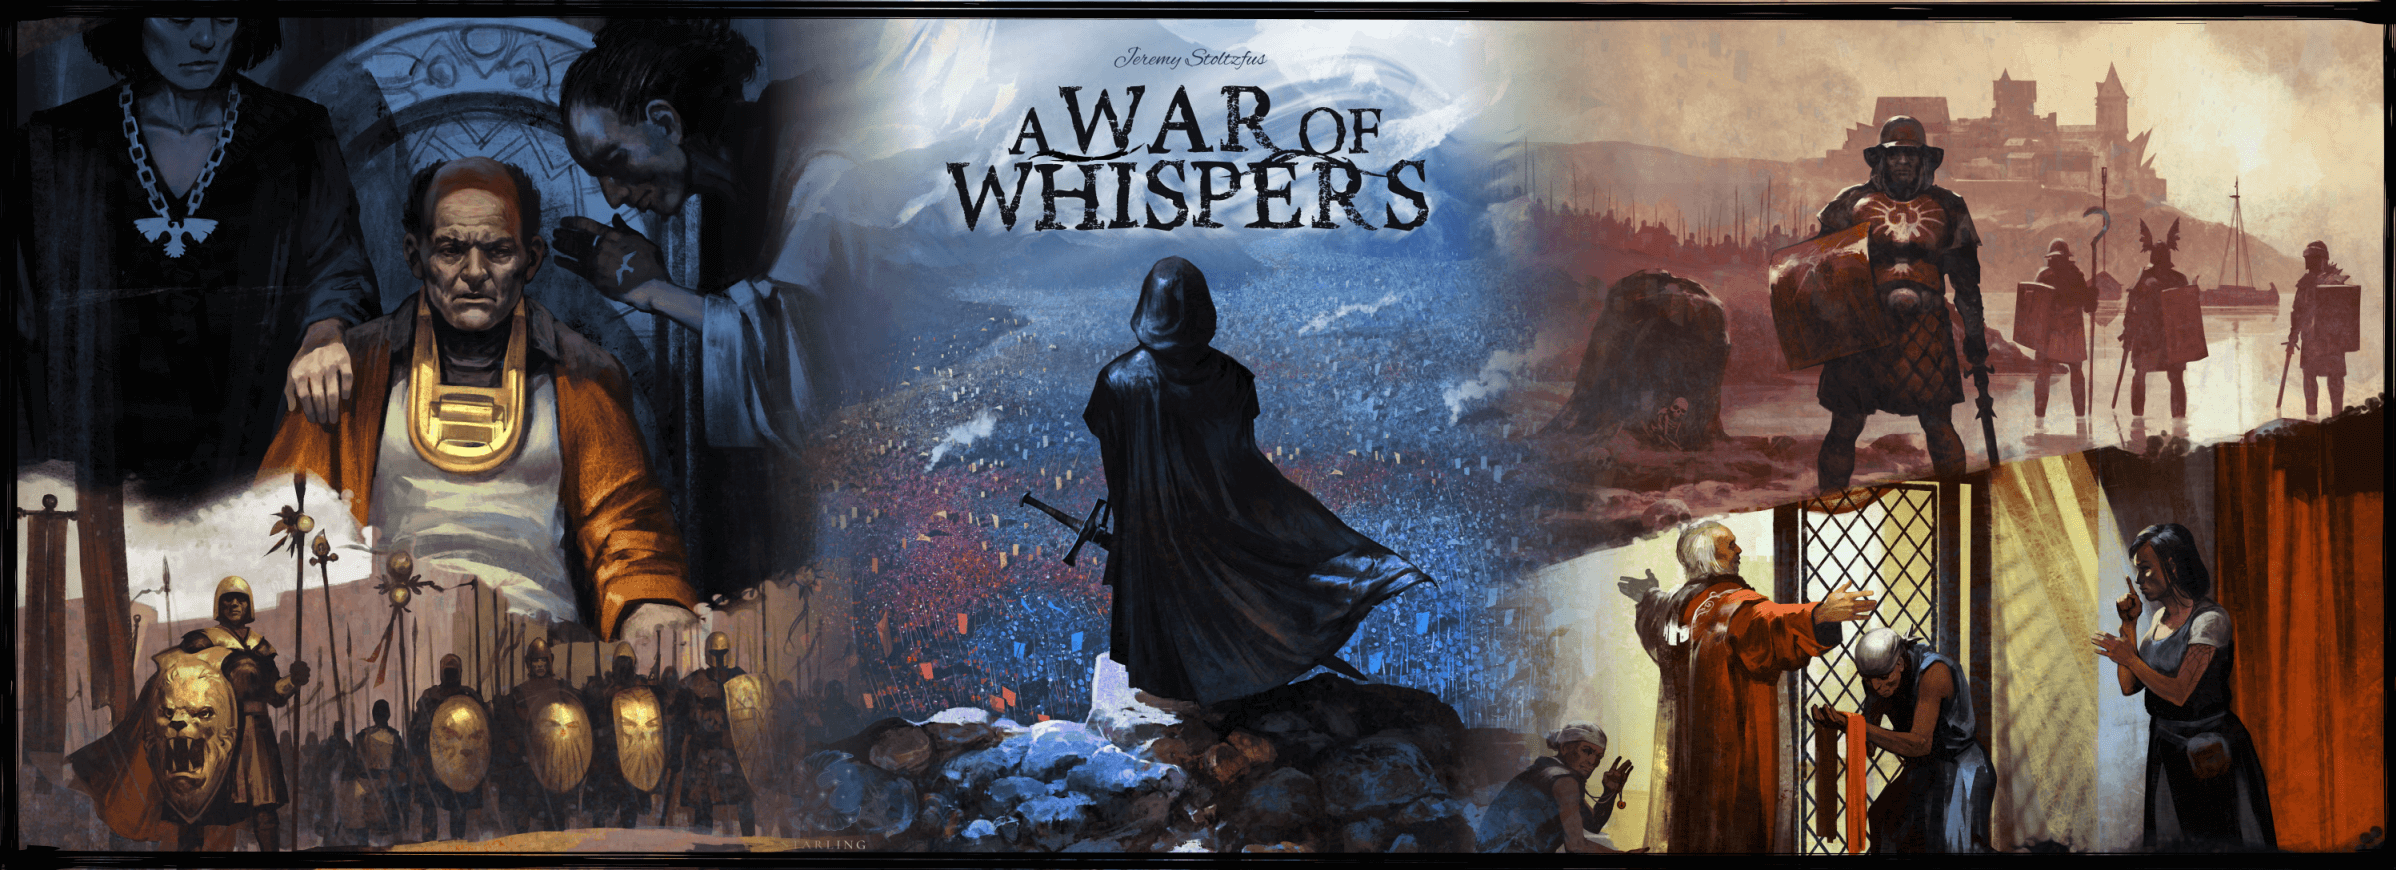 The War of Whispers Promo